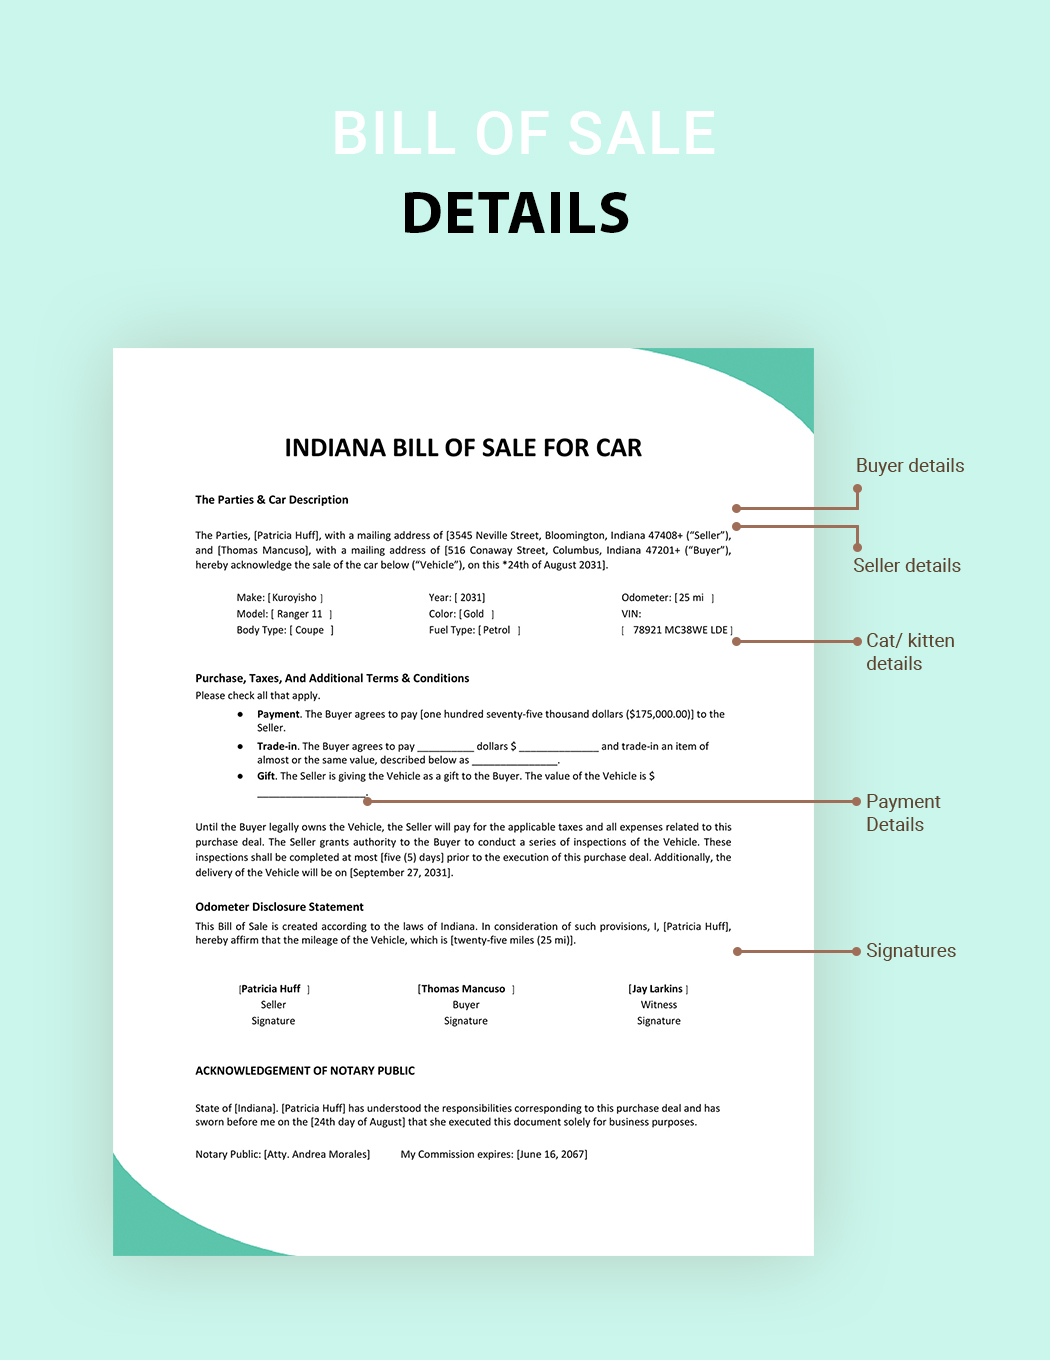 Indiana Bill of Sale For Car Template